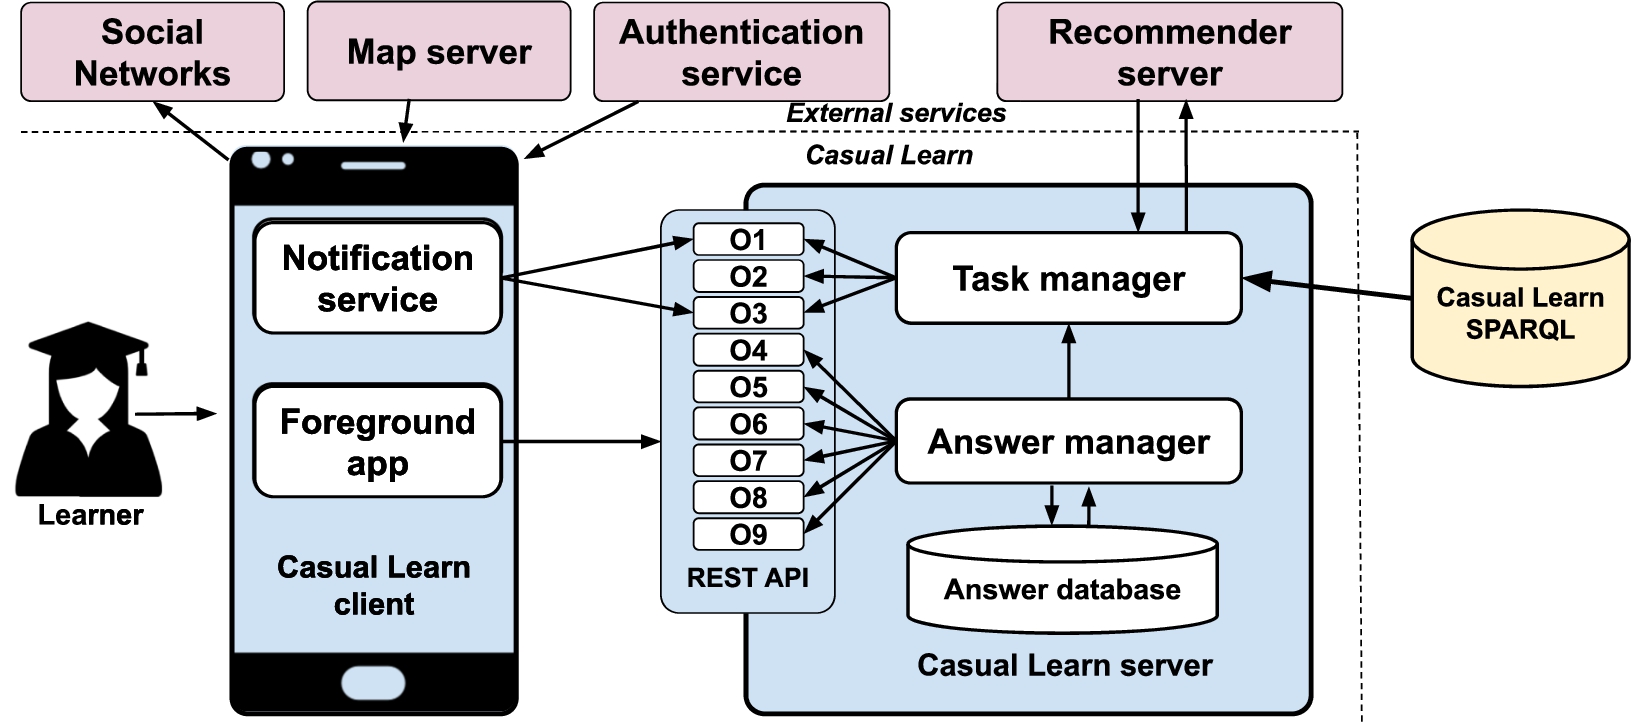 Casual Learn architecture. Elements with blue background belong to Casual Learn application; elements with purple background are external services; elements with yellow background are SPARQL endpoints that publish learning tasks following the SLEek ontology.